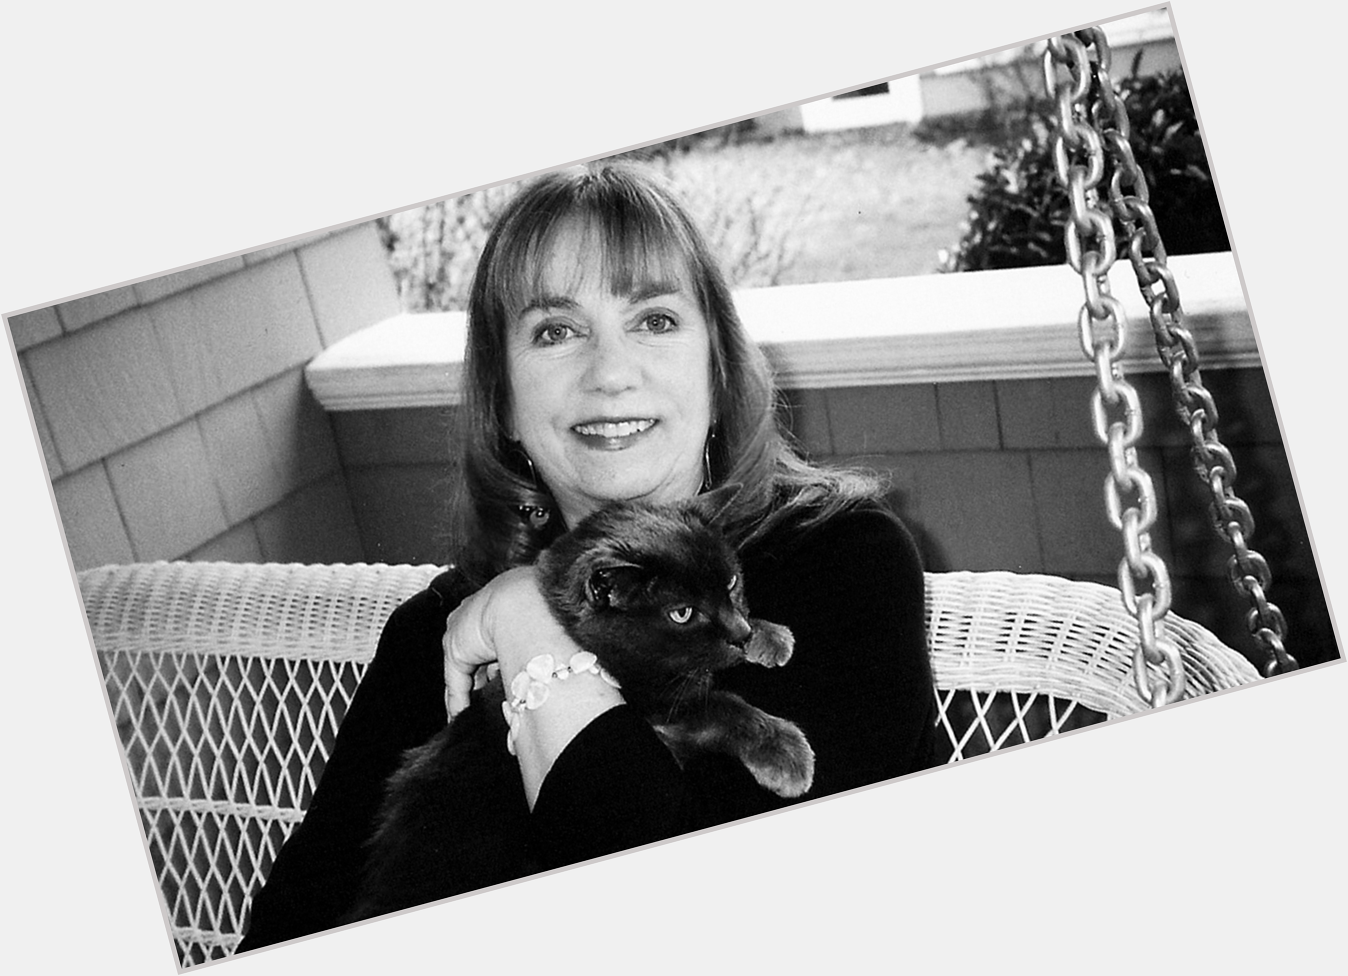 Happy Caturday AND Happy Birthday to author Cynthia Rylant! What is your favorite book by this author? 